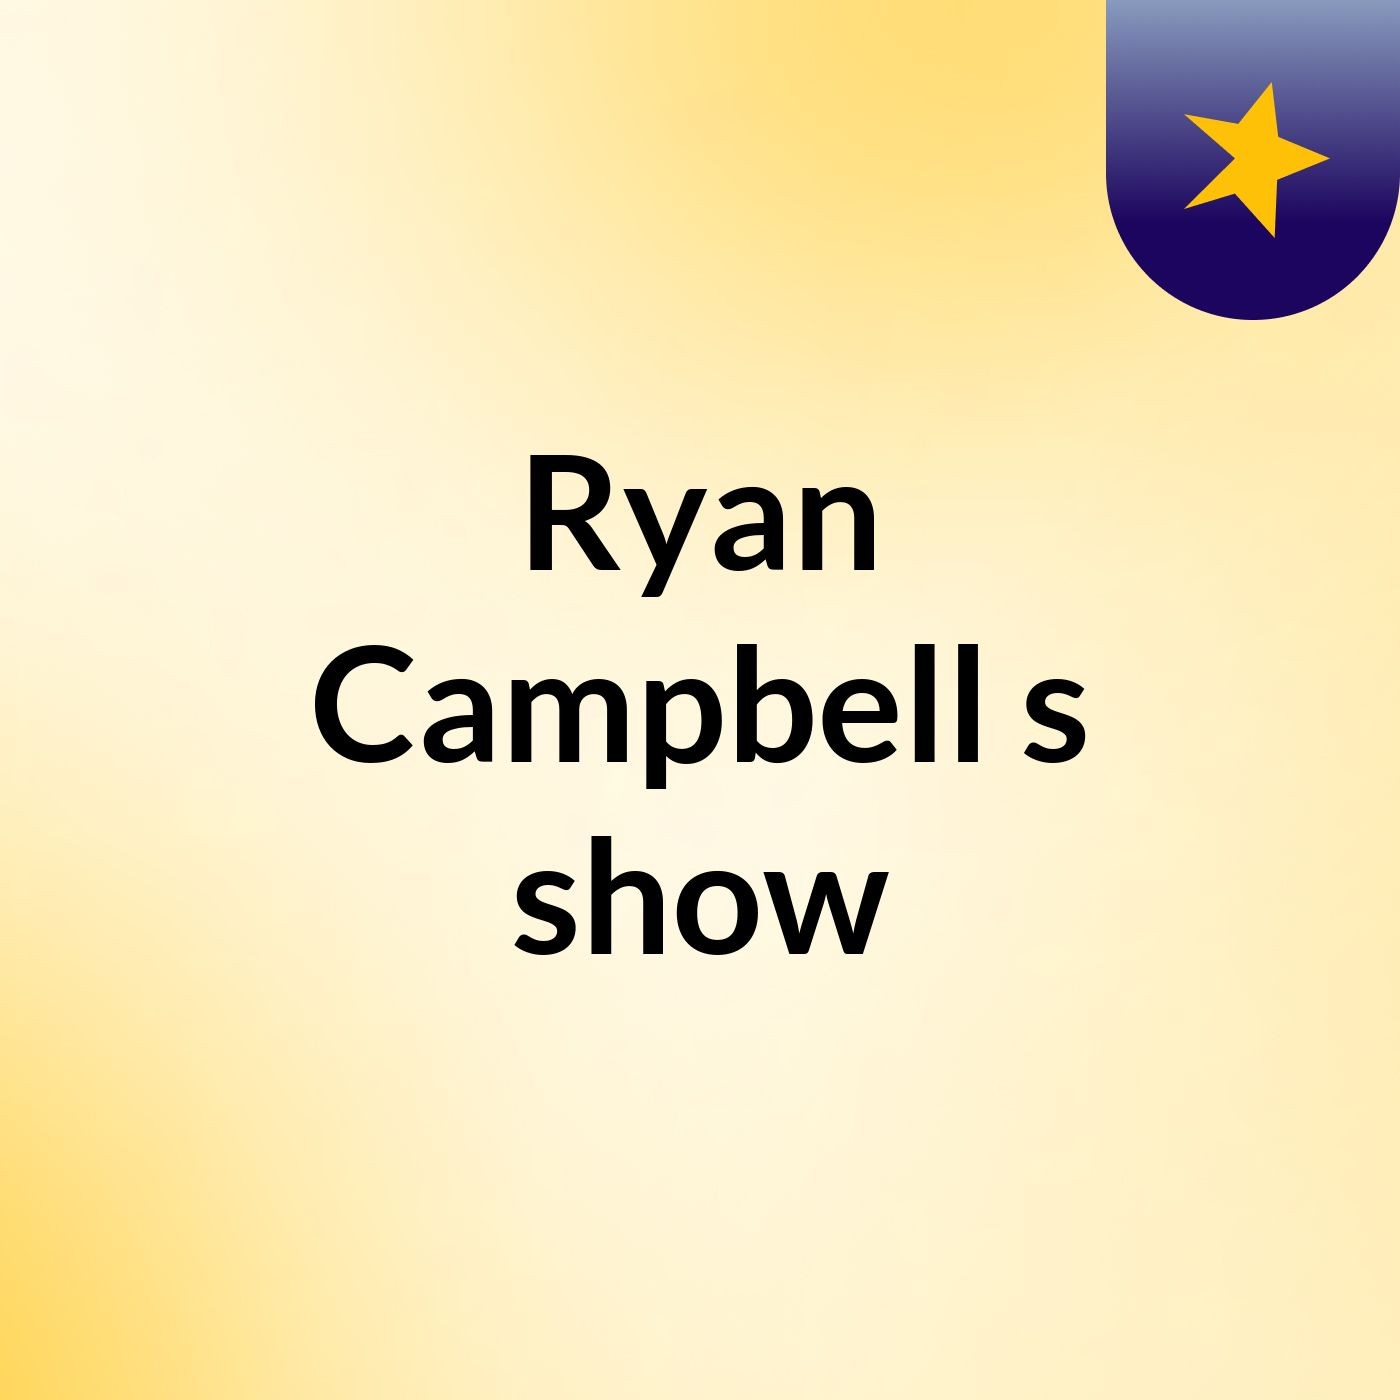 Ryan Campbell's show